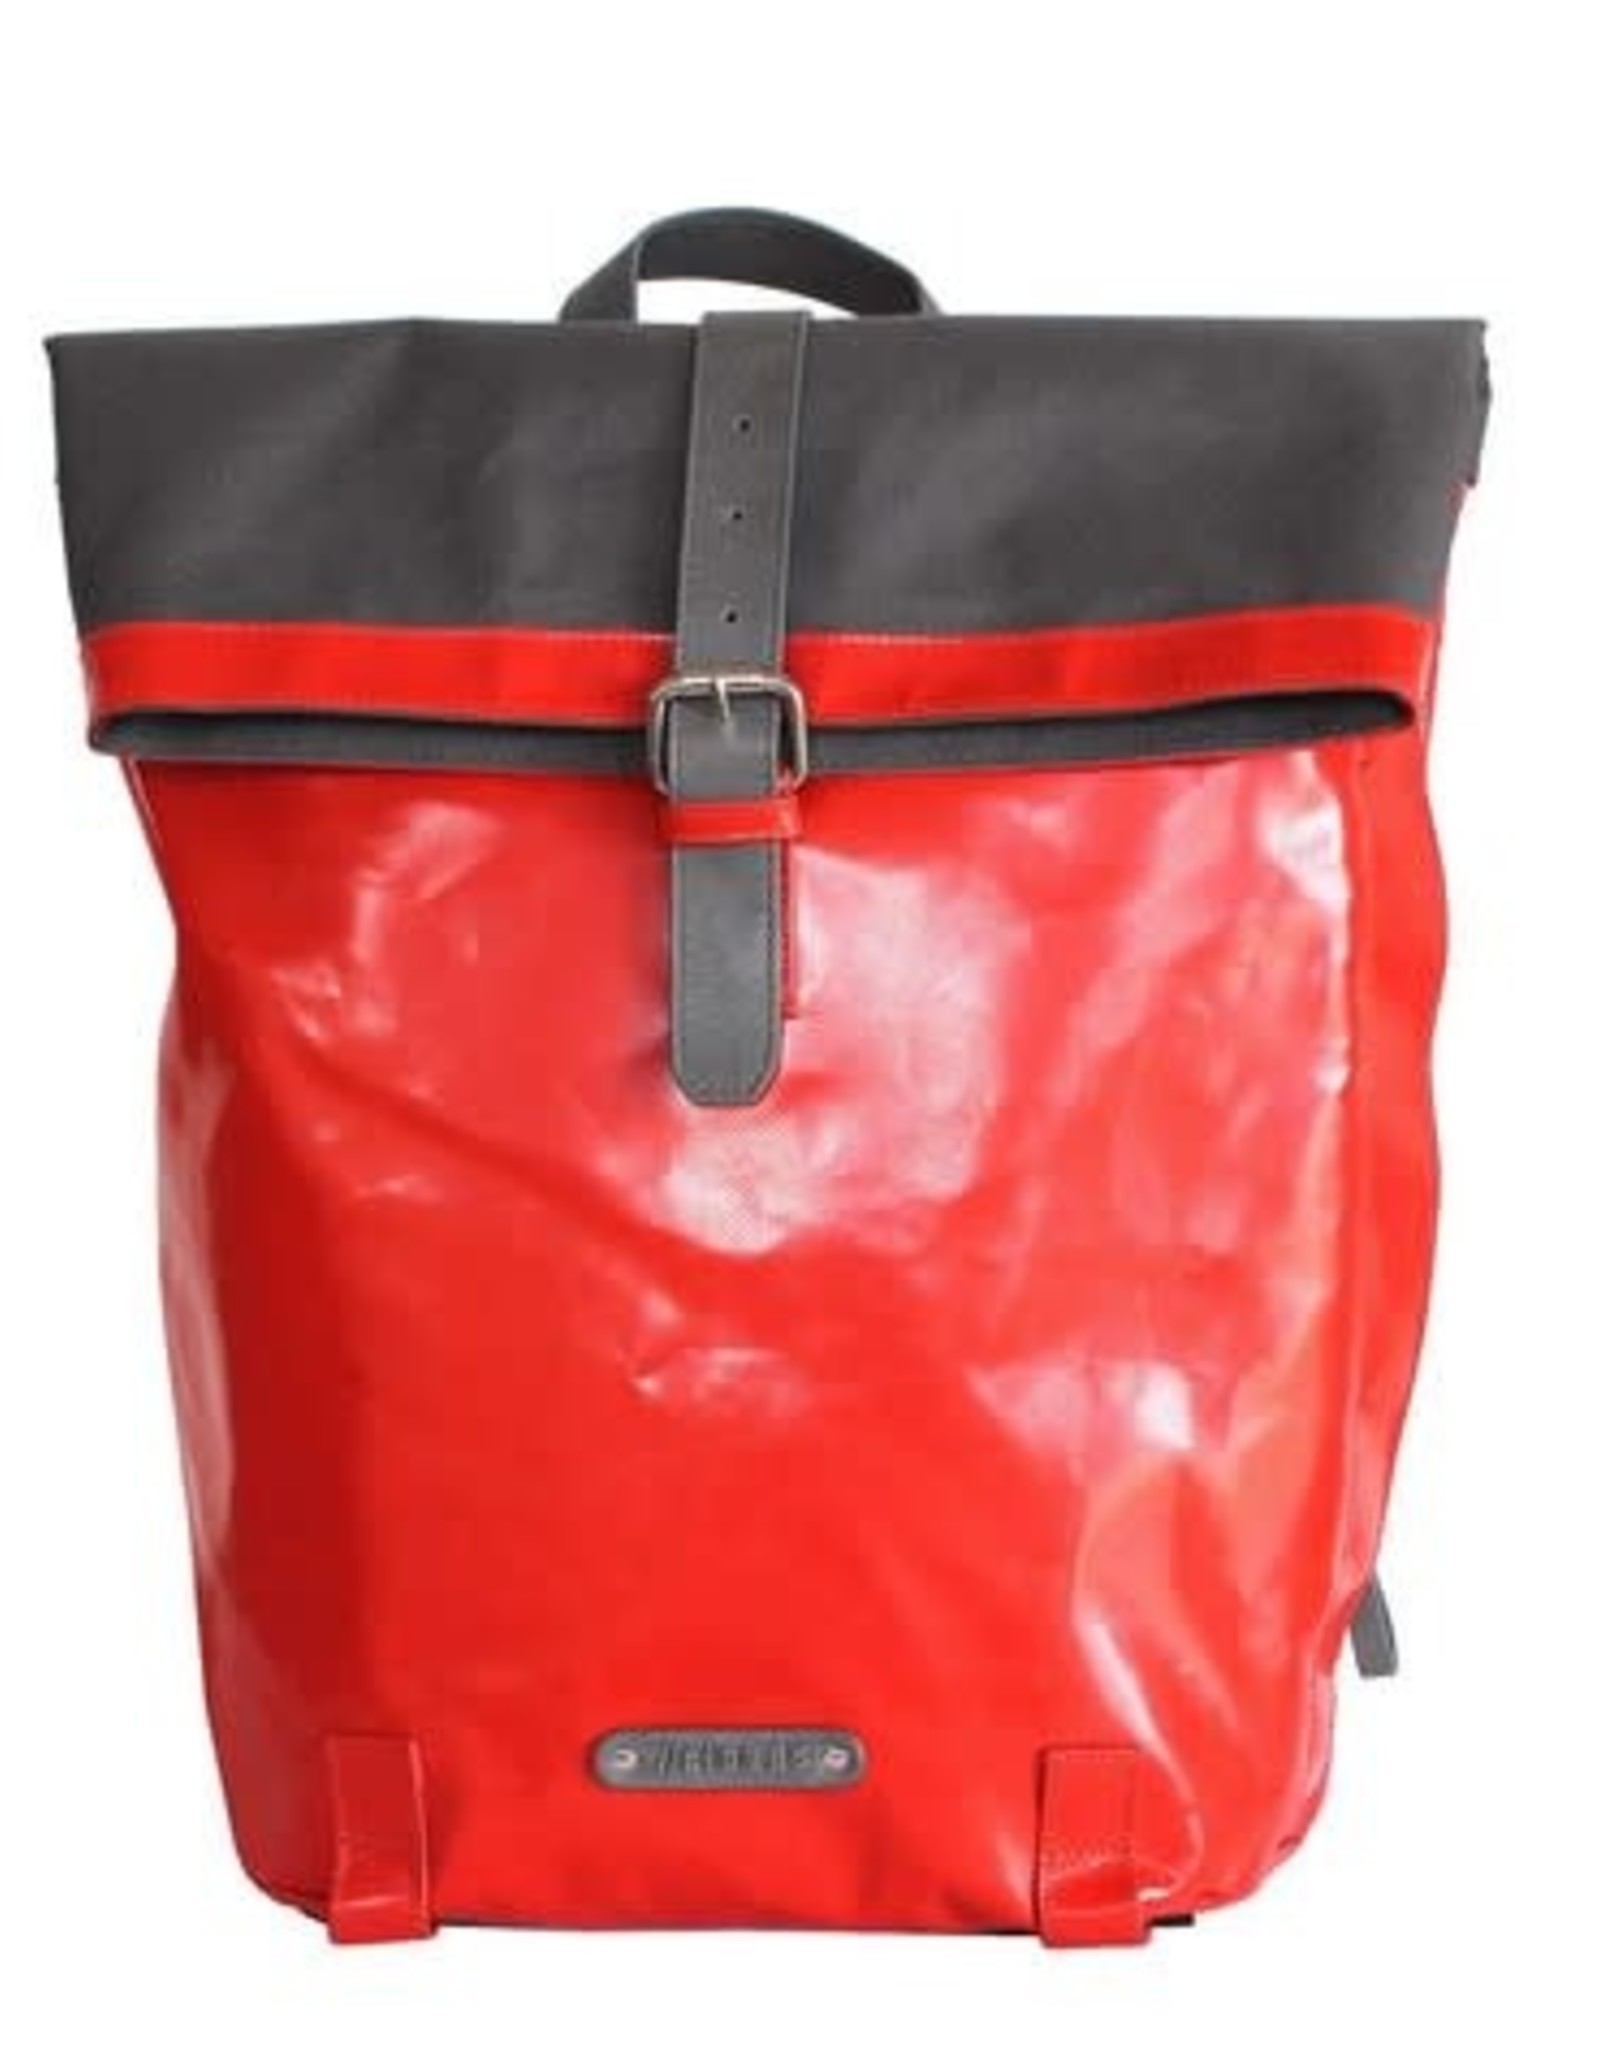 7clouds Dwars City Backpack - 3 color choices